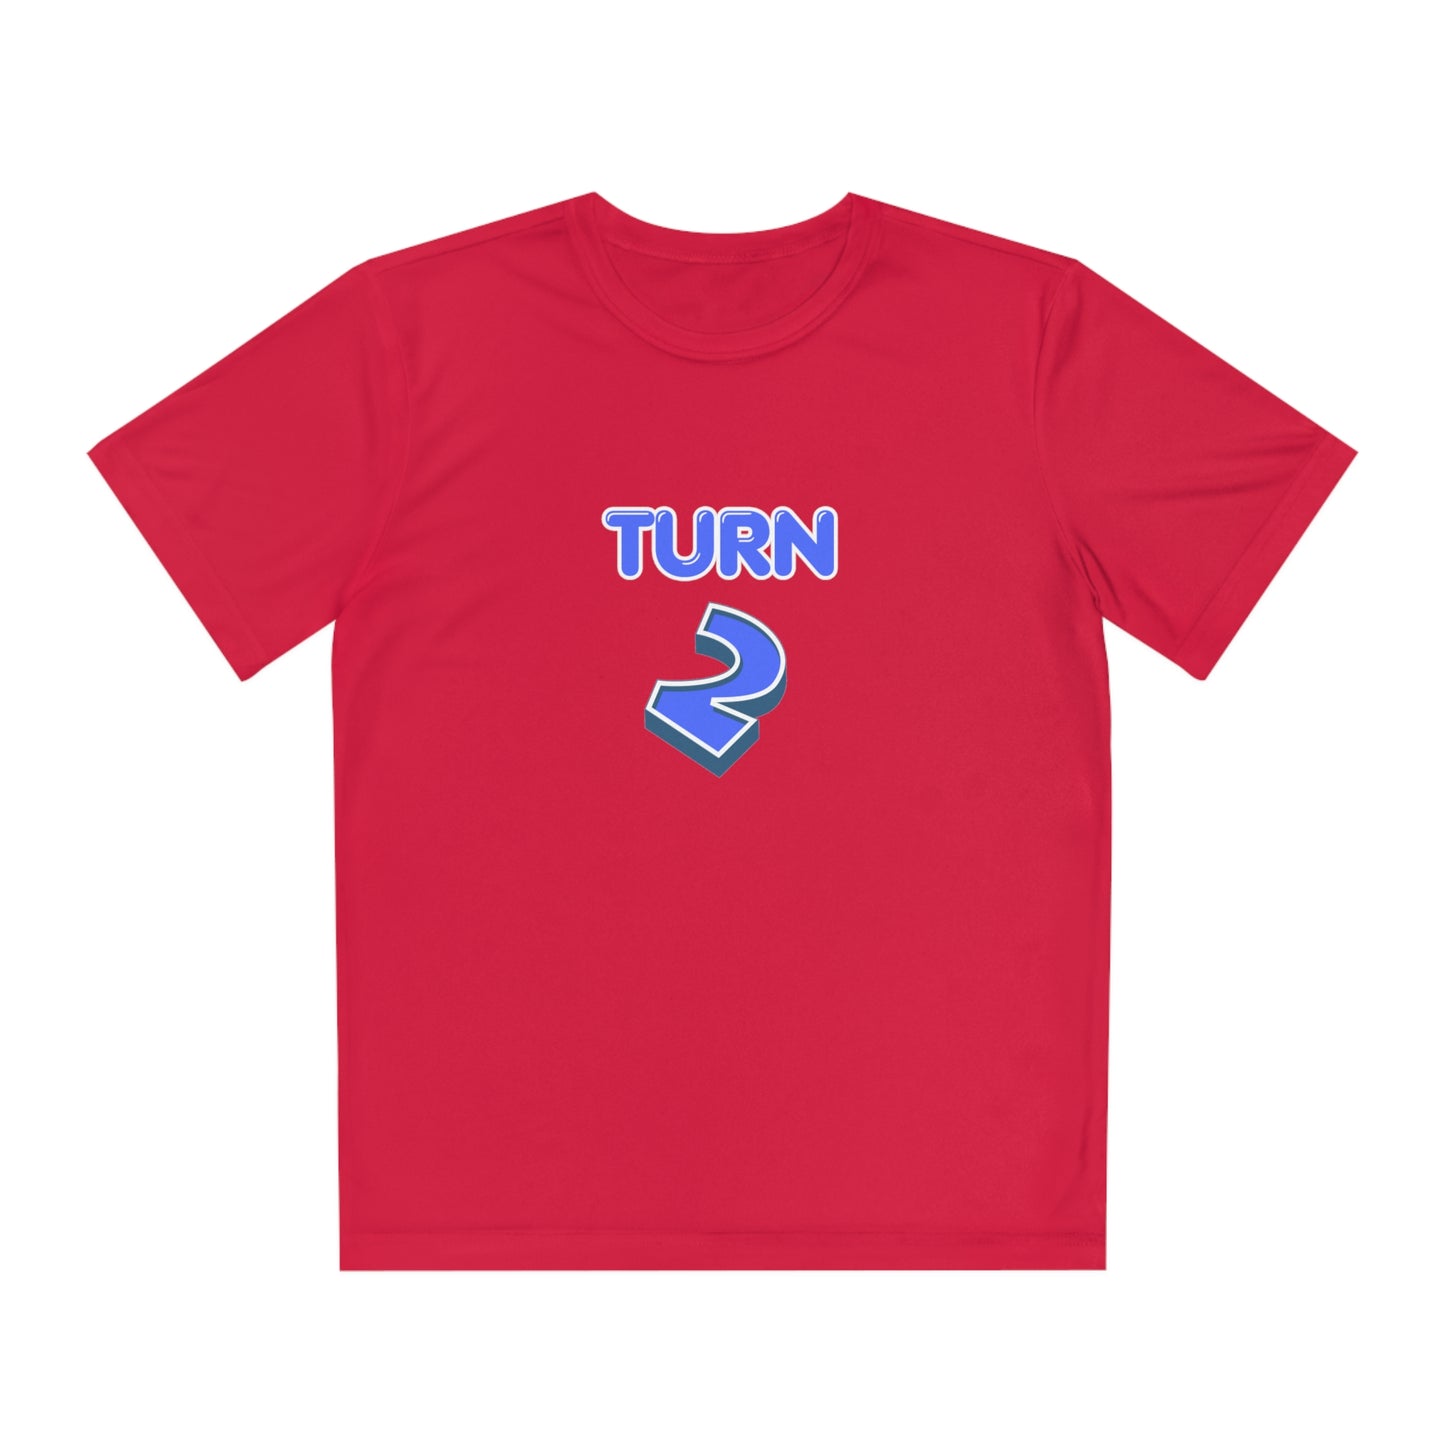 Turn 2 Youth Competitor Tee